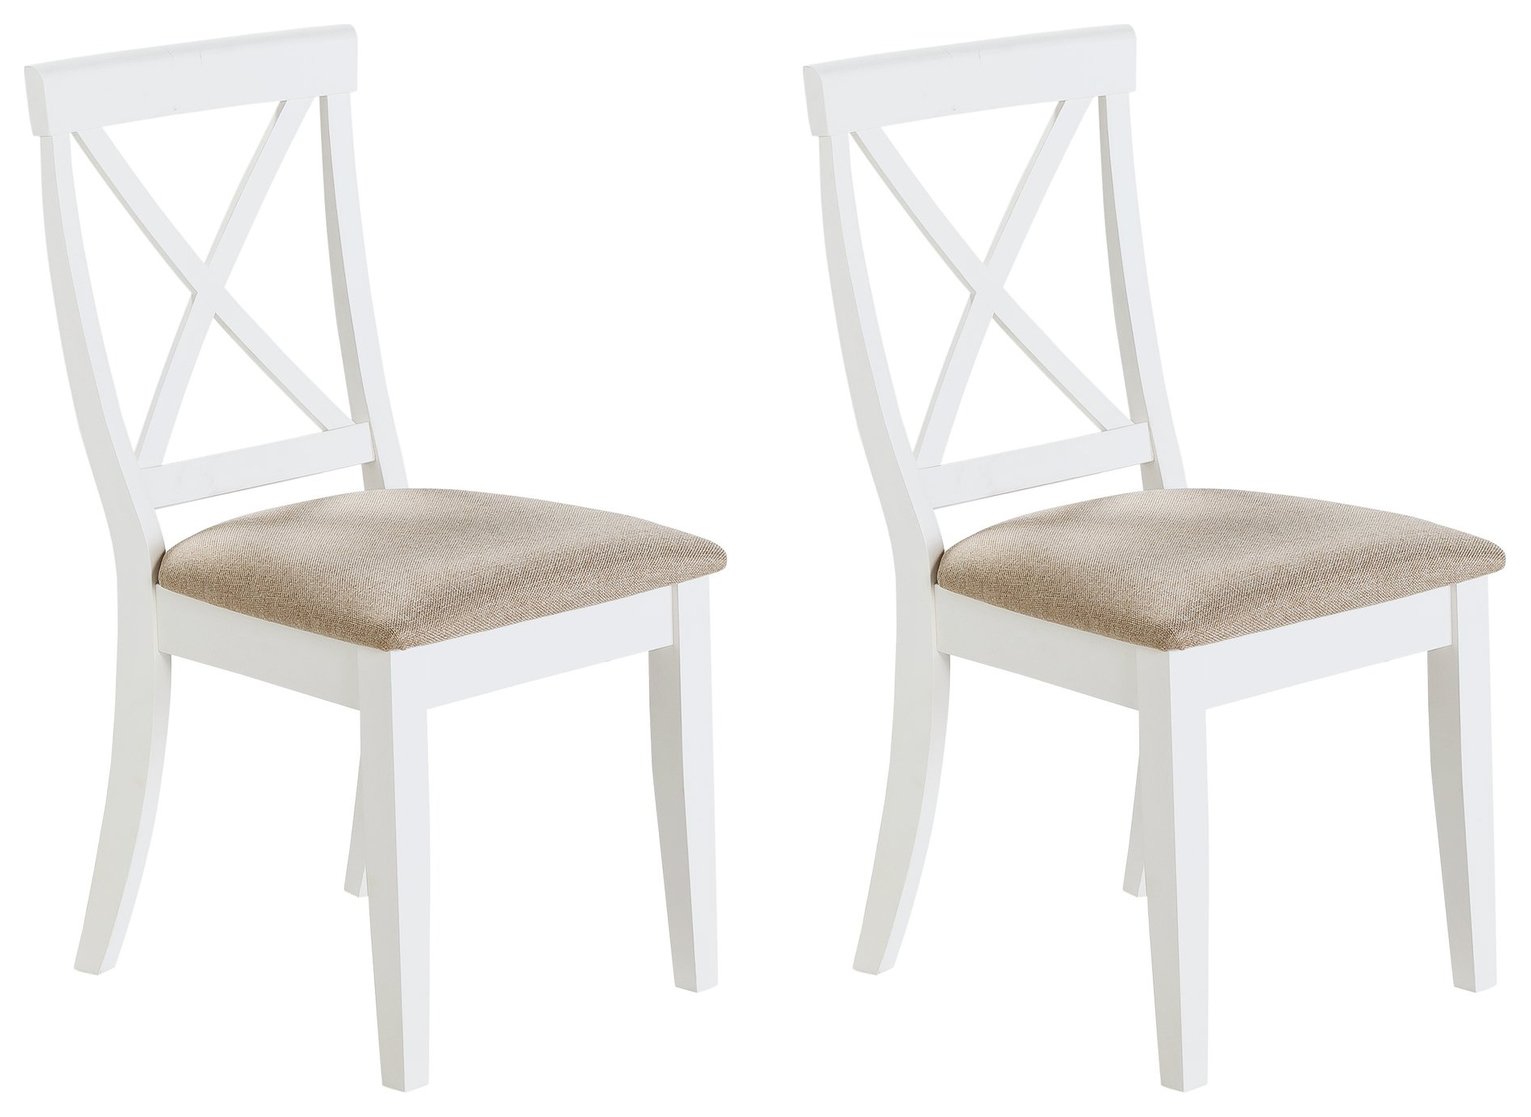 Argos Home Southwold Pair of Solid Wood Chairs Reviews